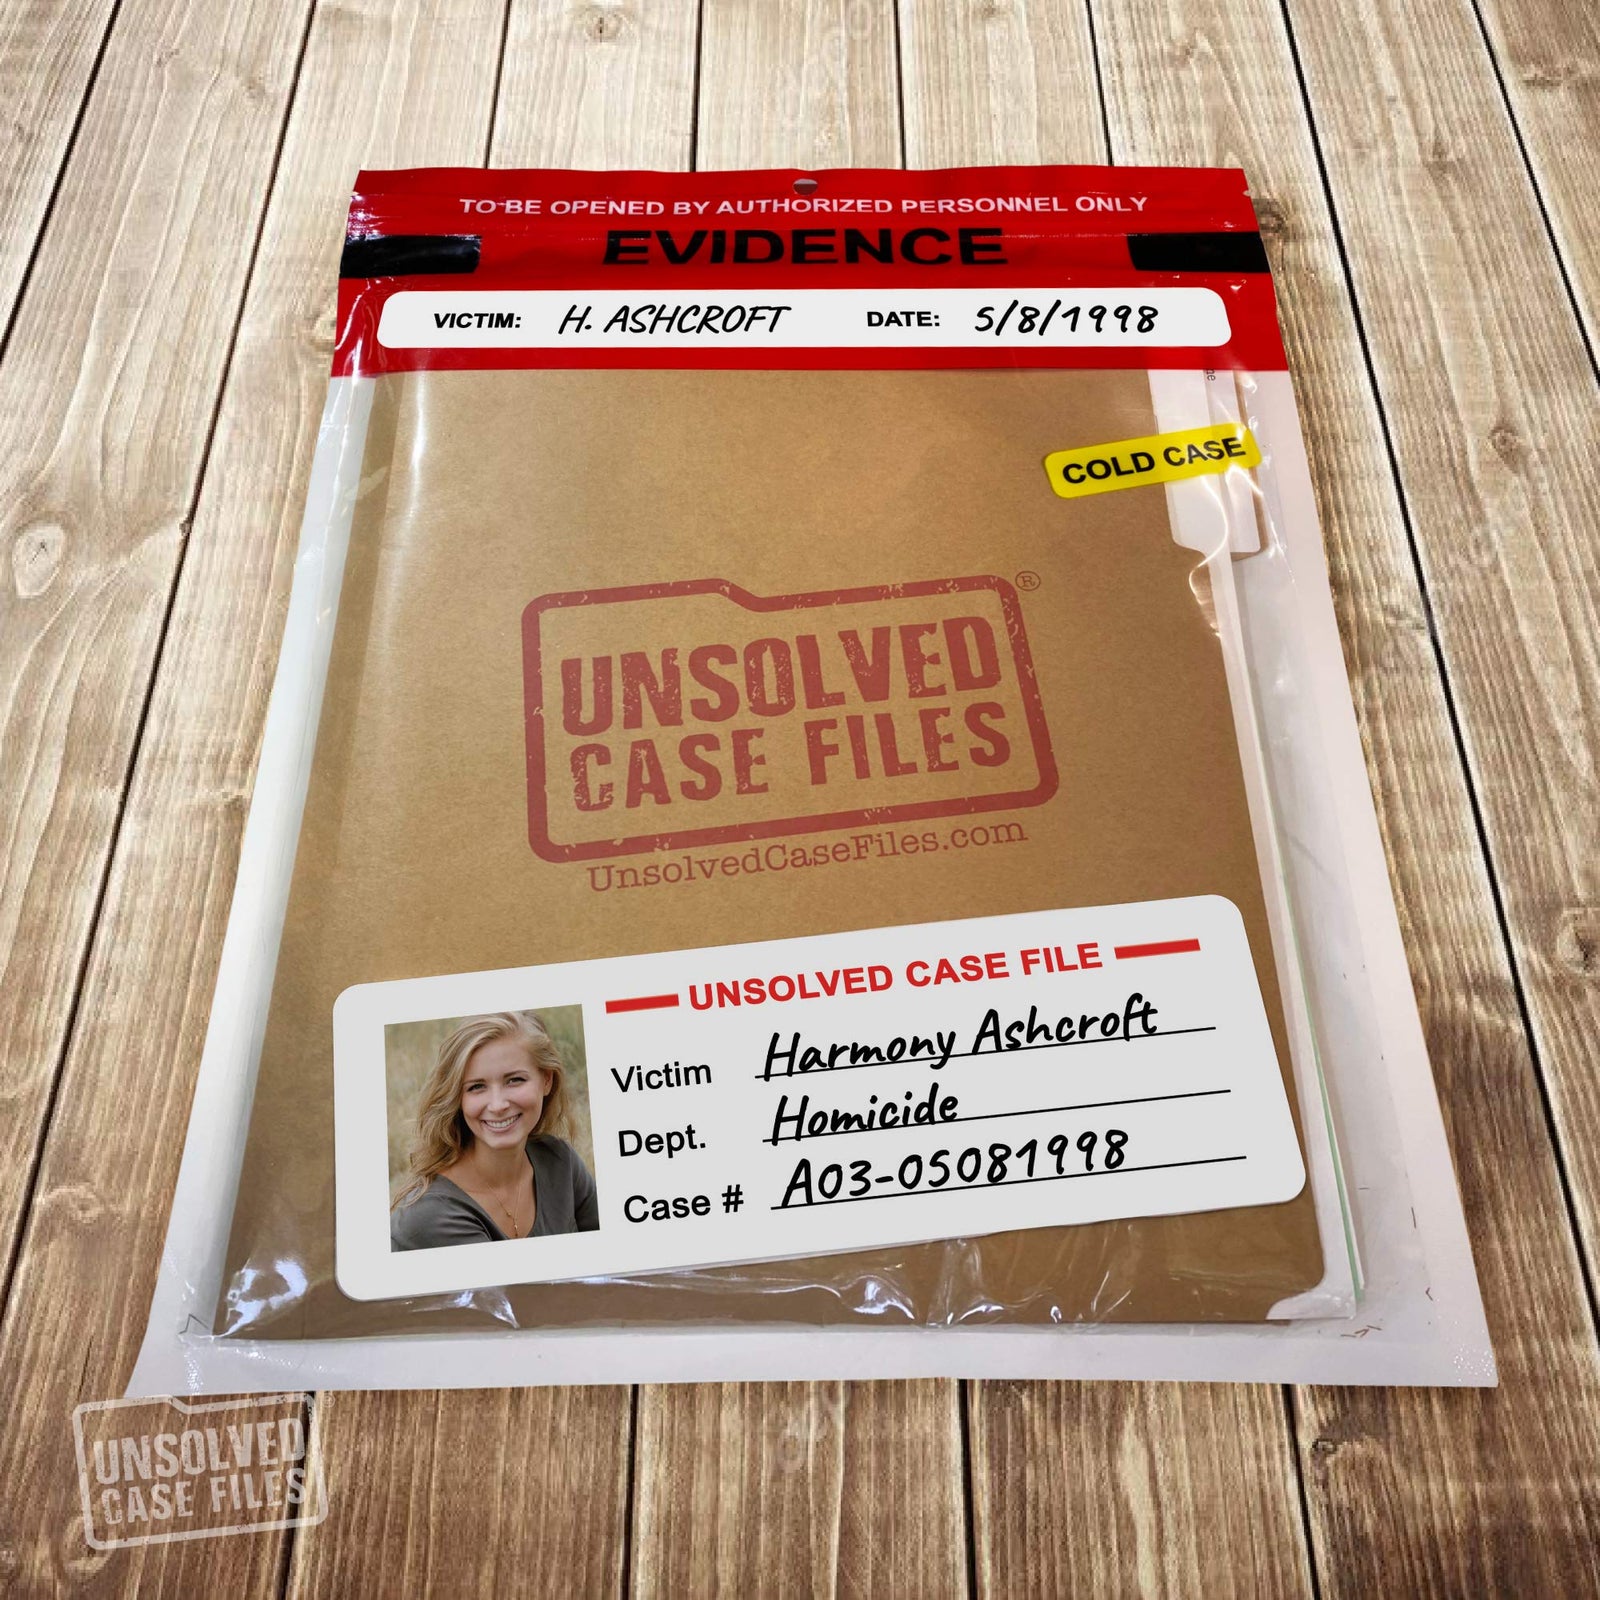 UNSOLVED CASE FILES: Cold Case Murder Mystery Game: Who Murdered Harmony Ashcroft? | Can You Solve The Crime?